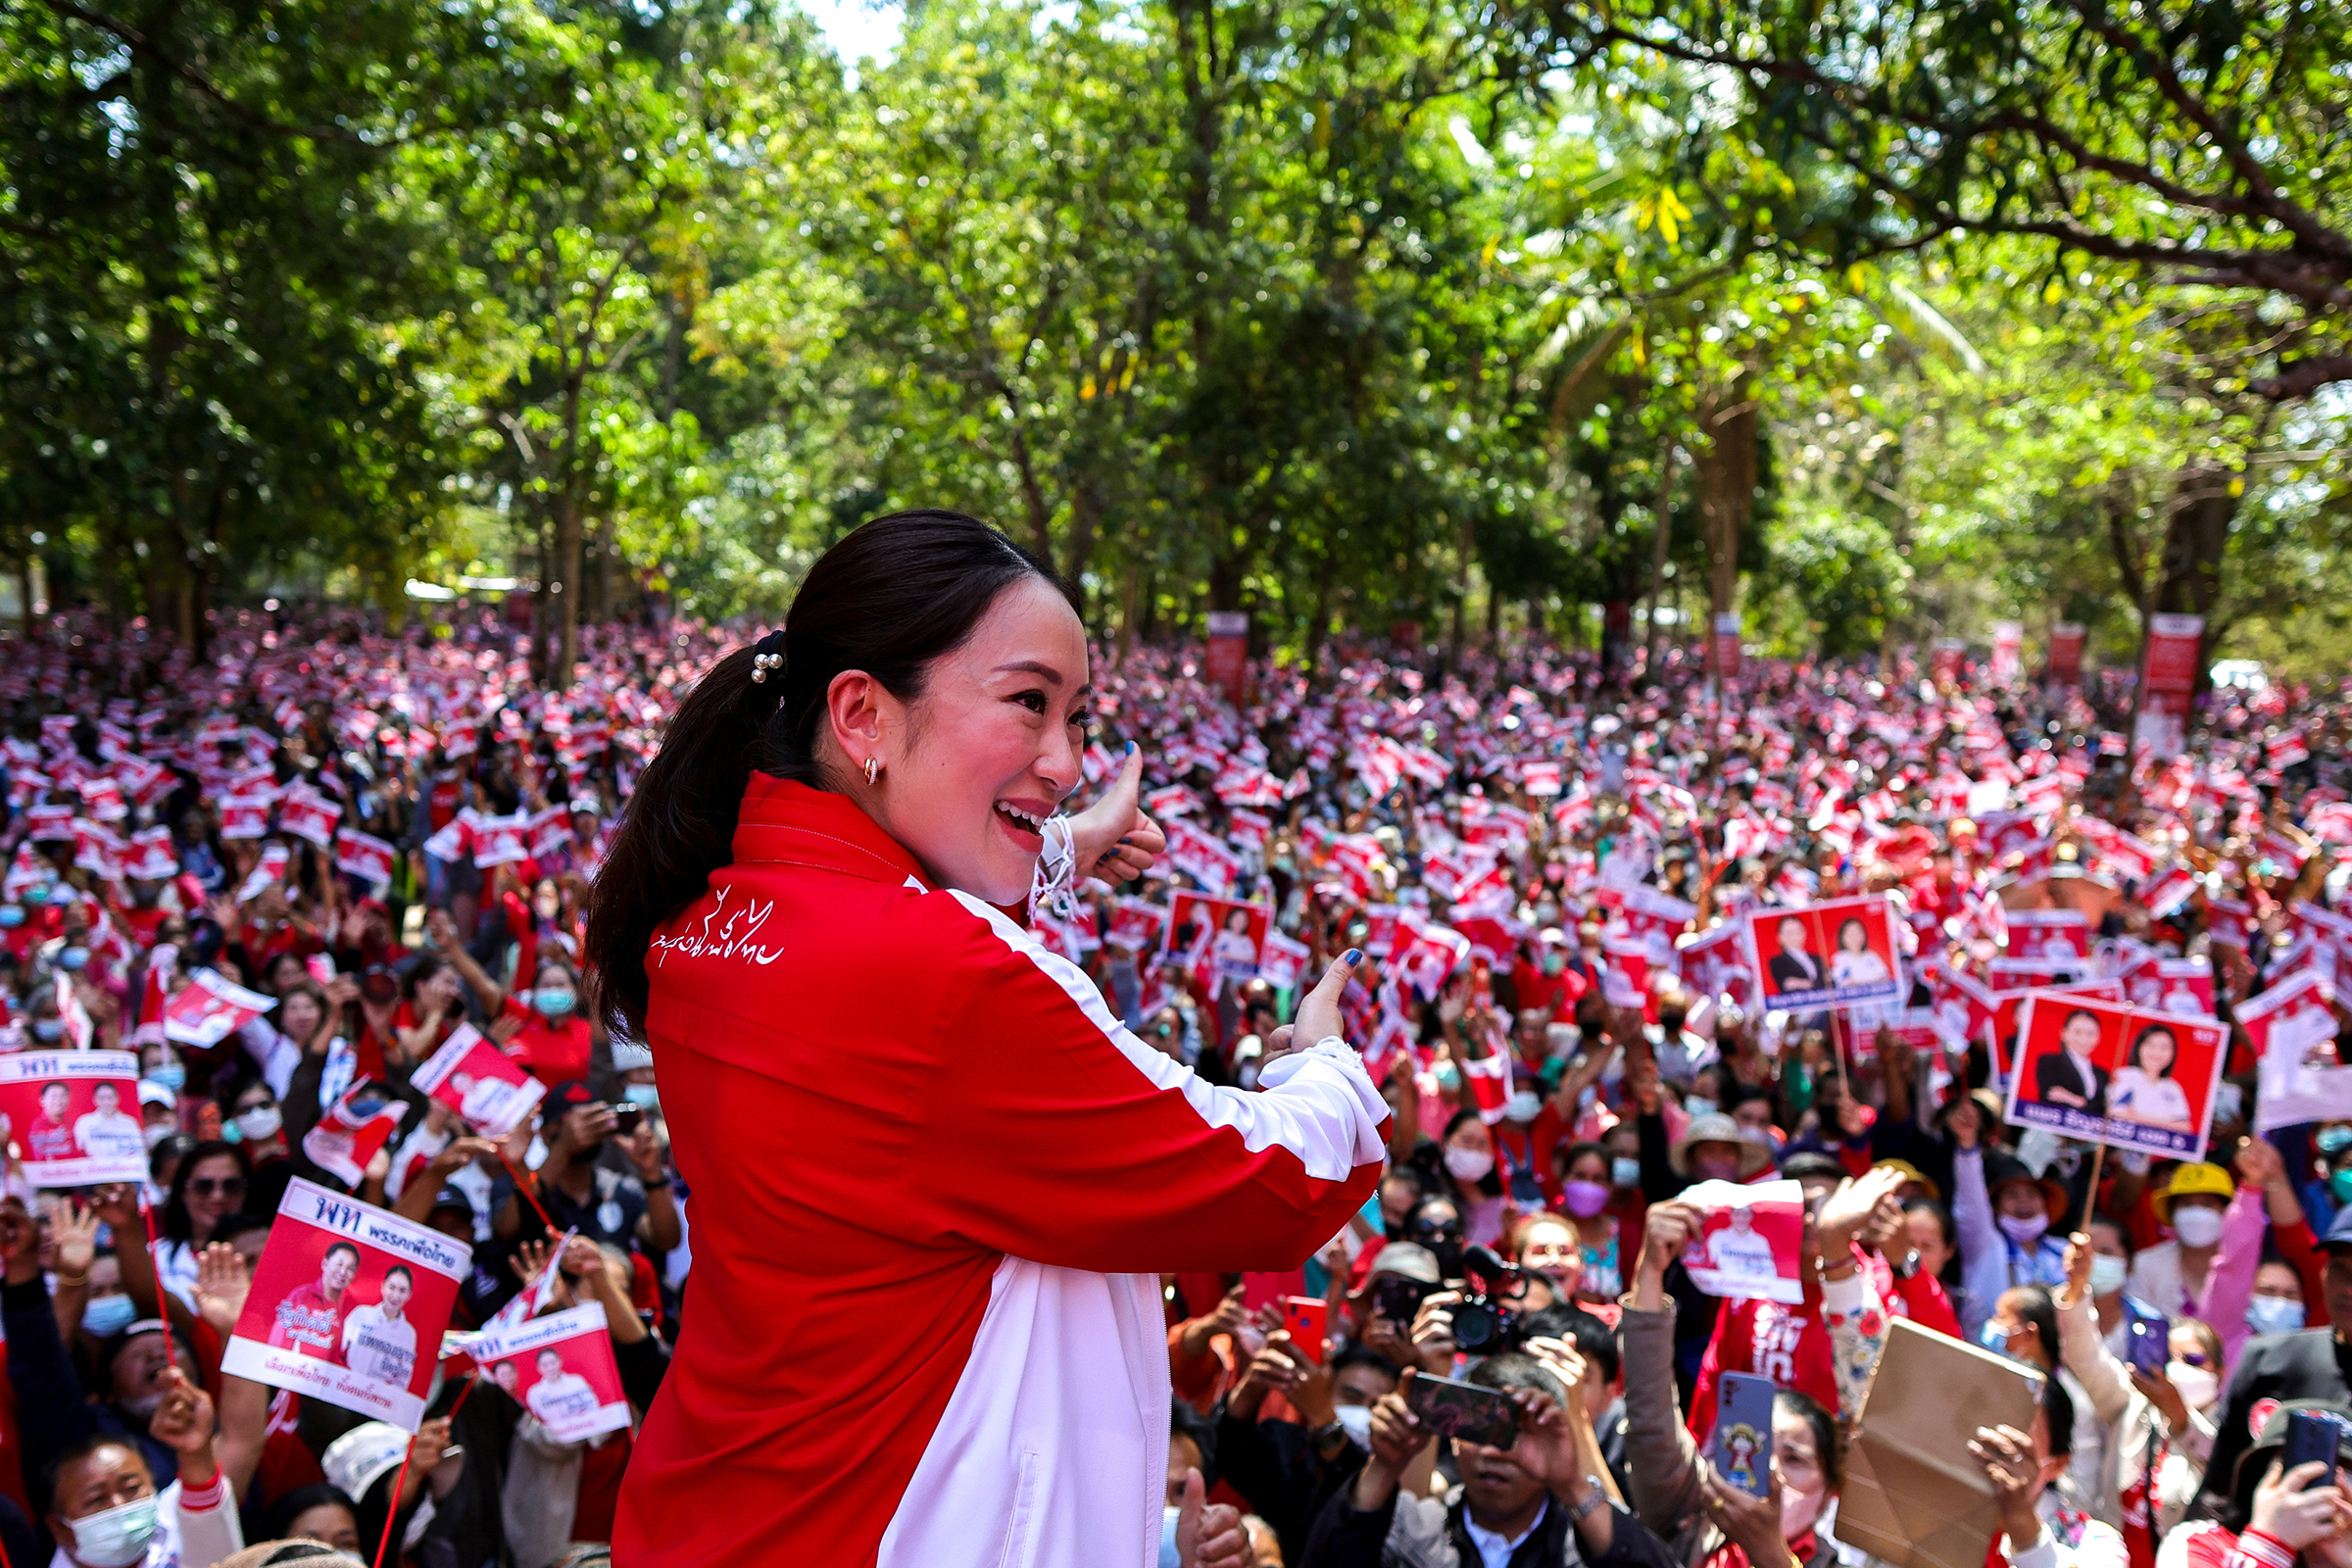 Paetongtarn Shinawatra, 36, the Pheu Thai Party's most visible candidate for prime minister, greets supporters during the general election campaign at a temple in Ubon Ratchathani province, Thailand, on Feb. 17. (Athit Perawongmetha—Reuters)